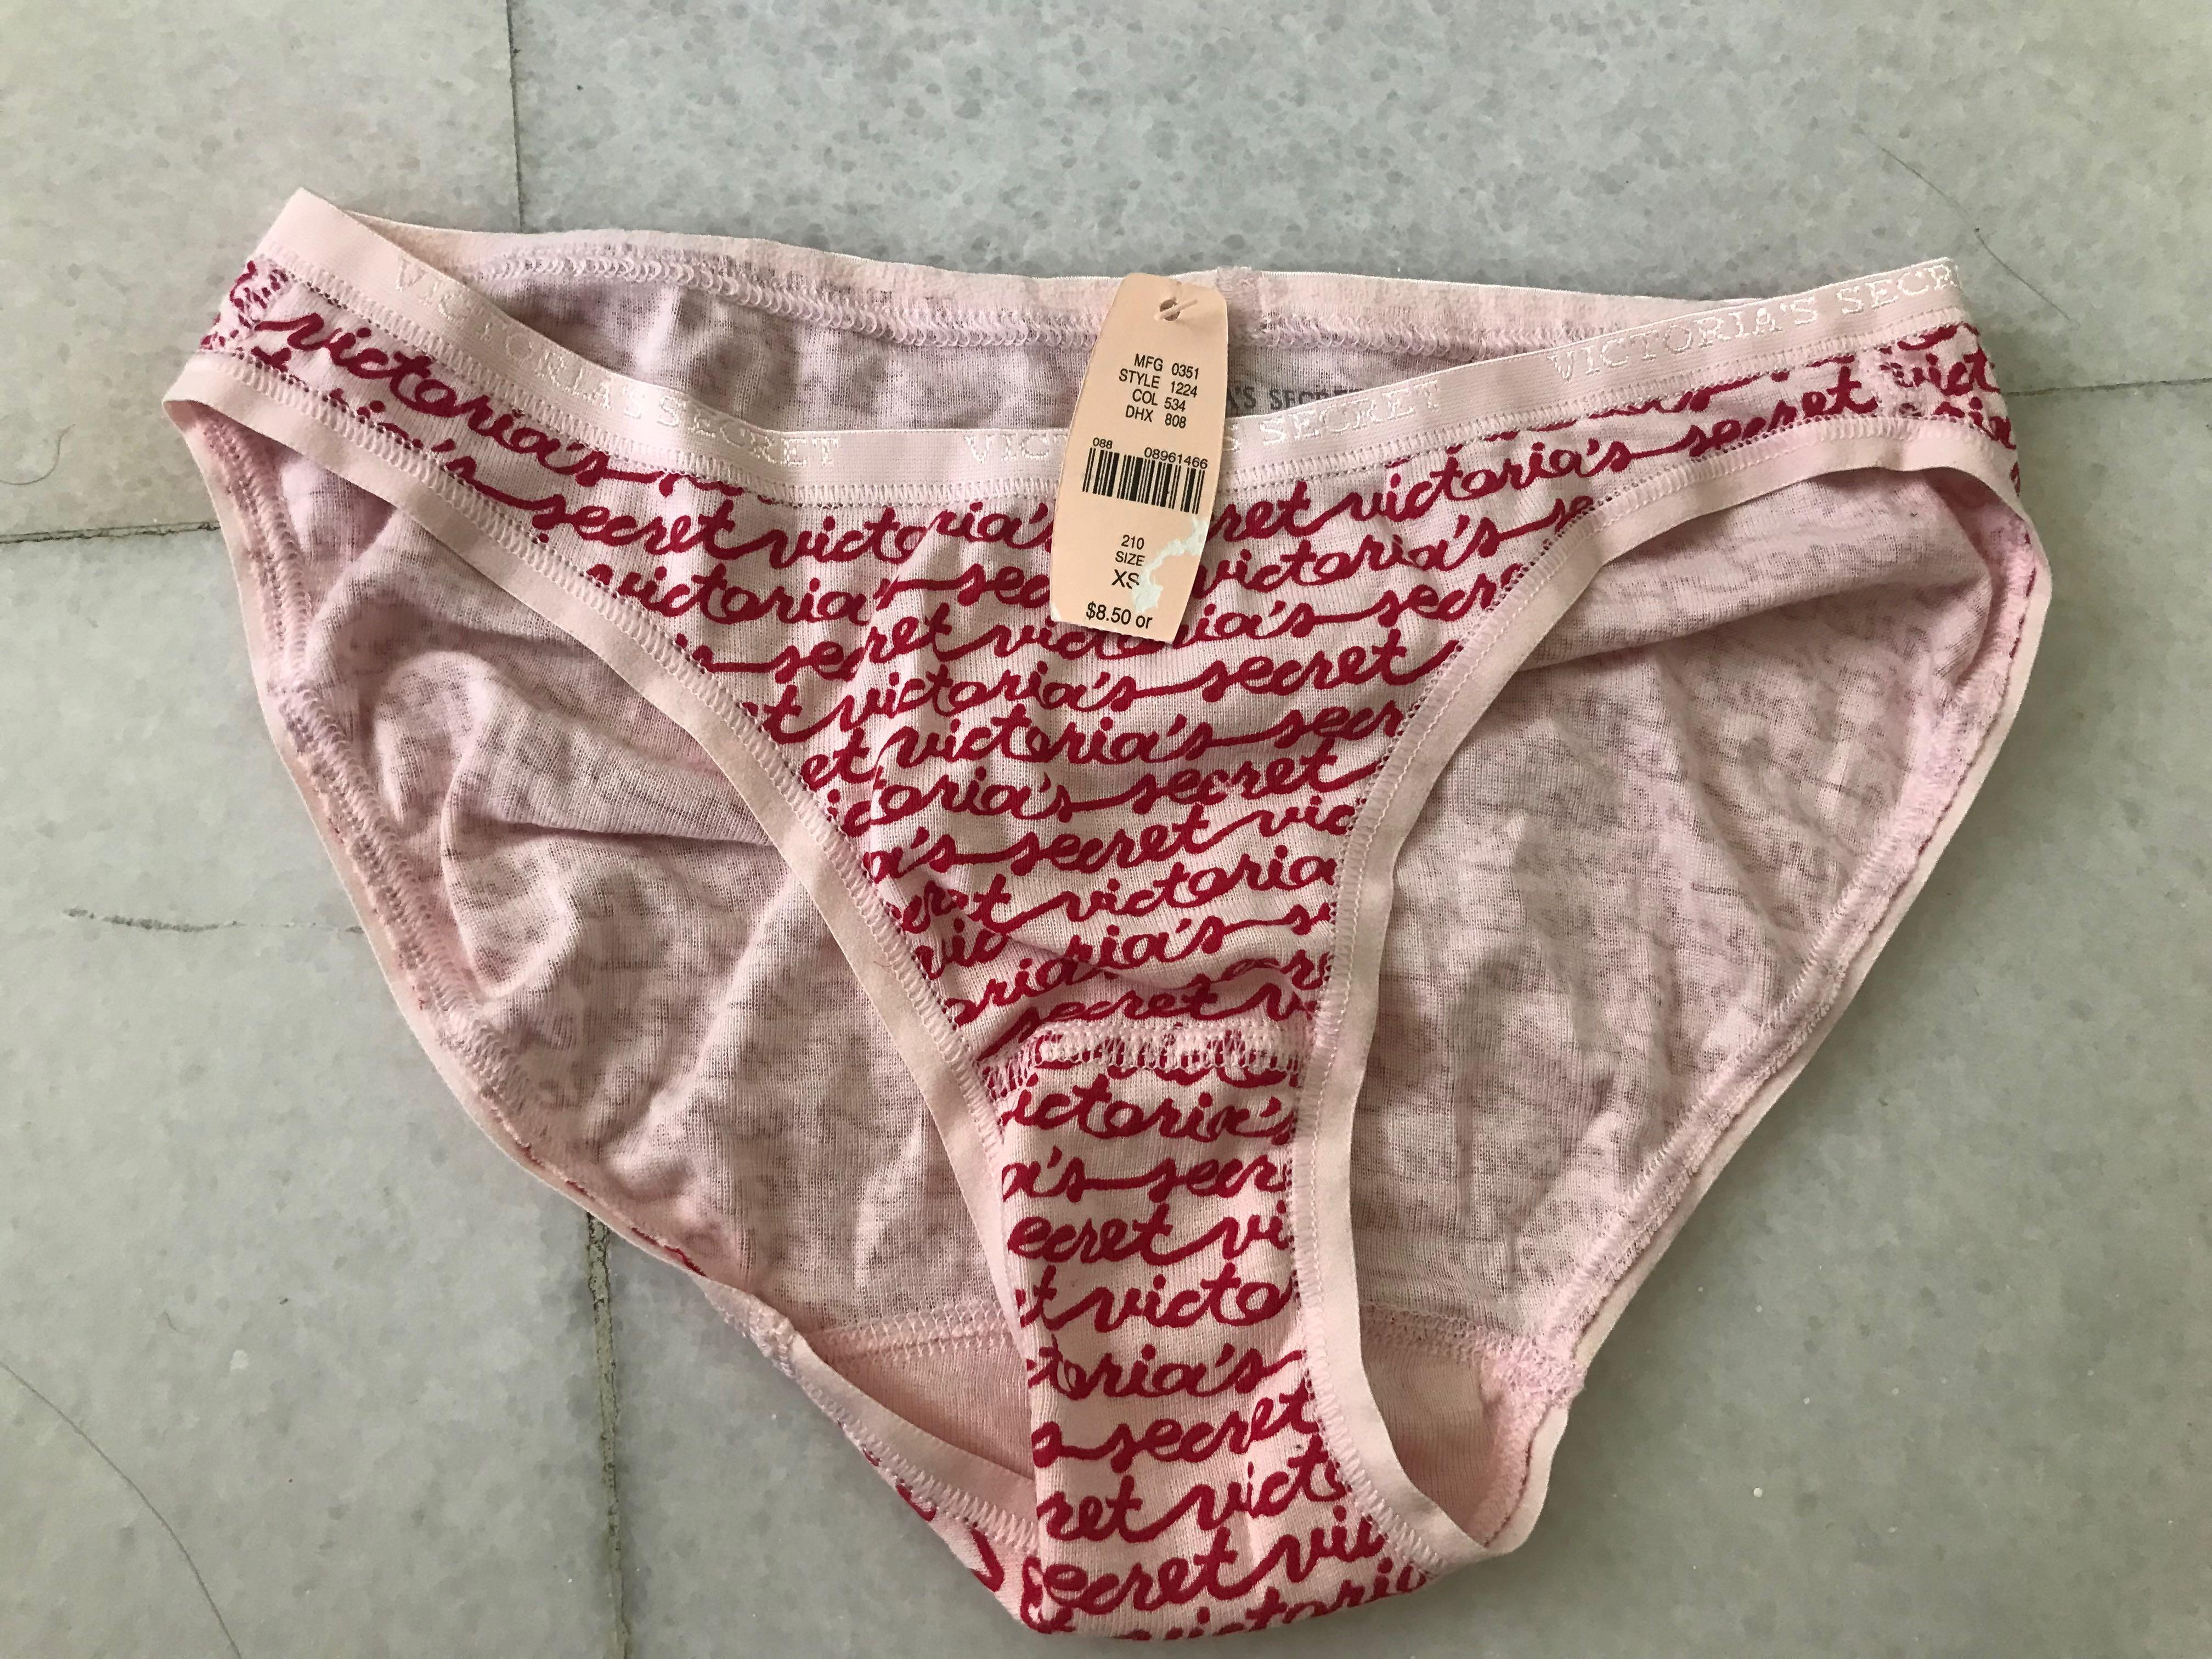 Victoria Secret Panties Underwear New with Tags